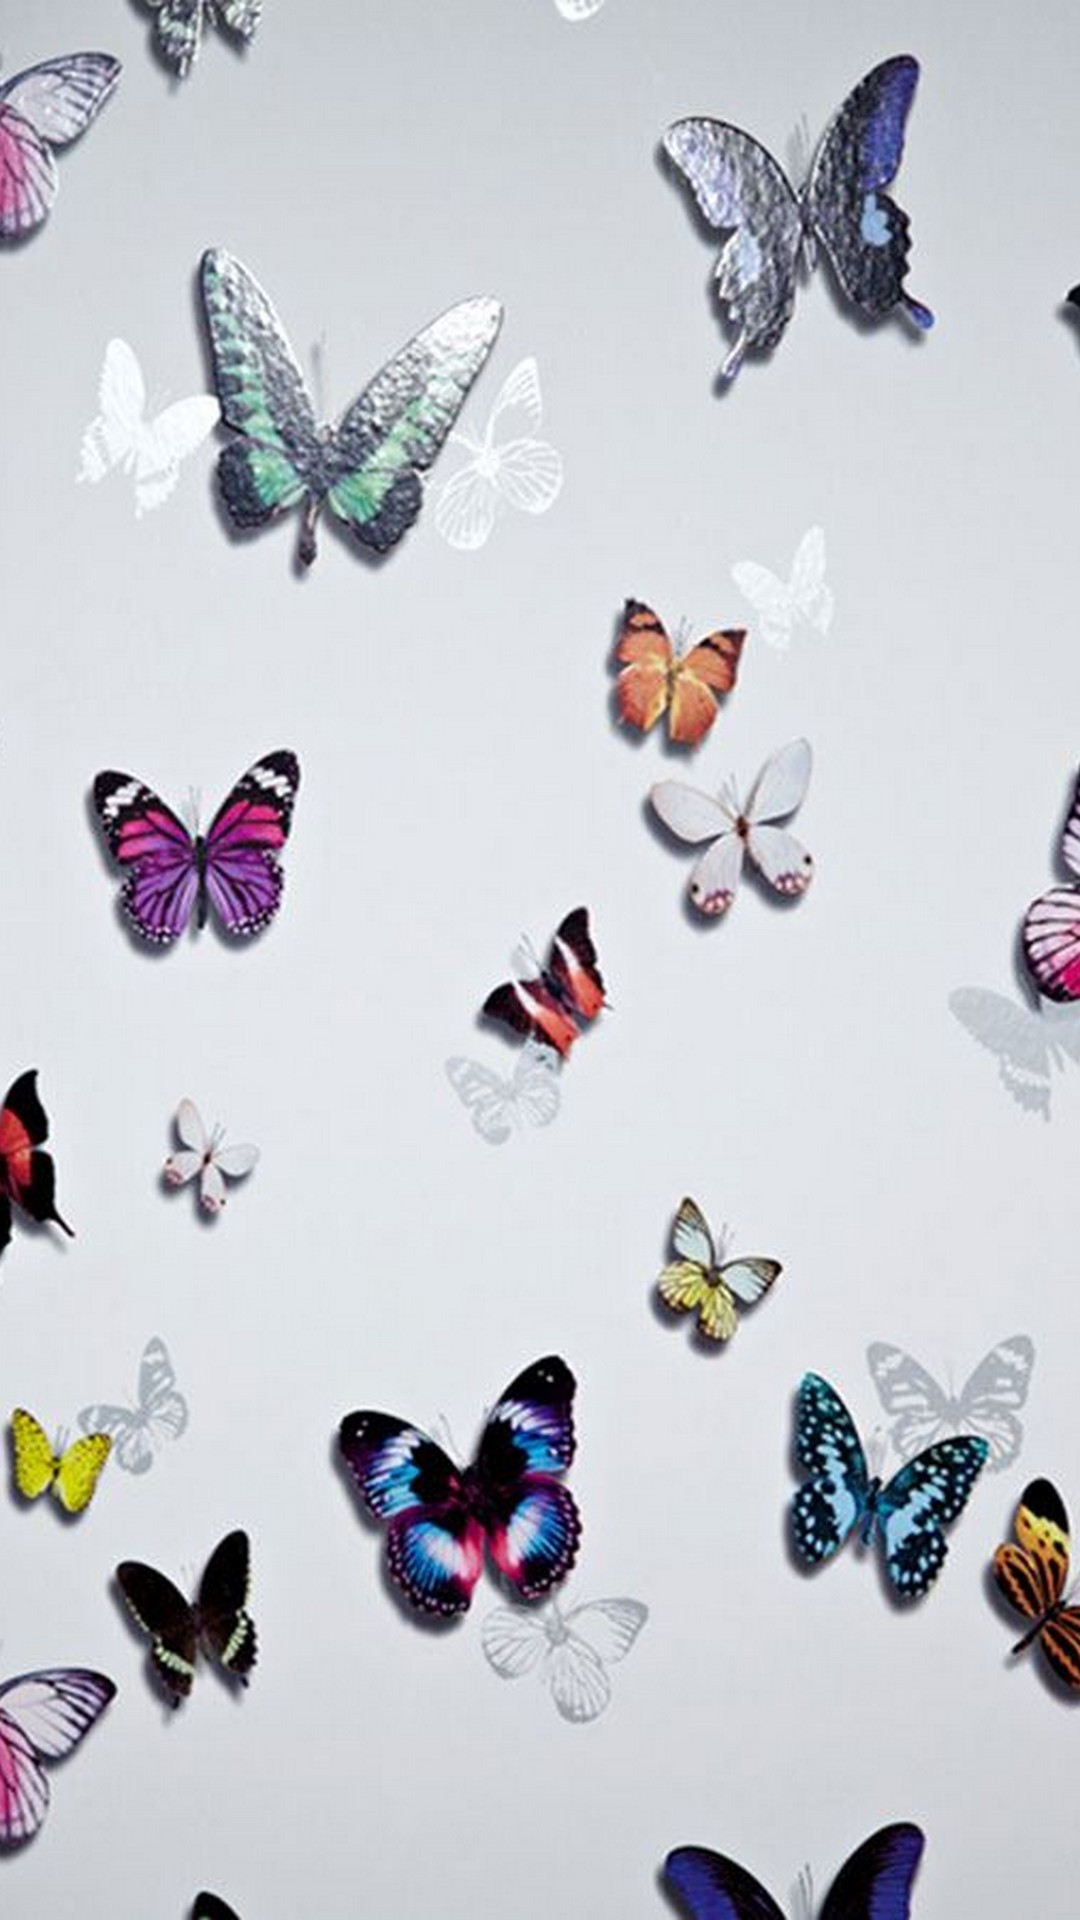 Butterfly HD Wallpapers For Android with HD resolution 1080x1920